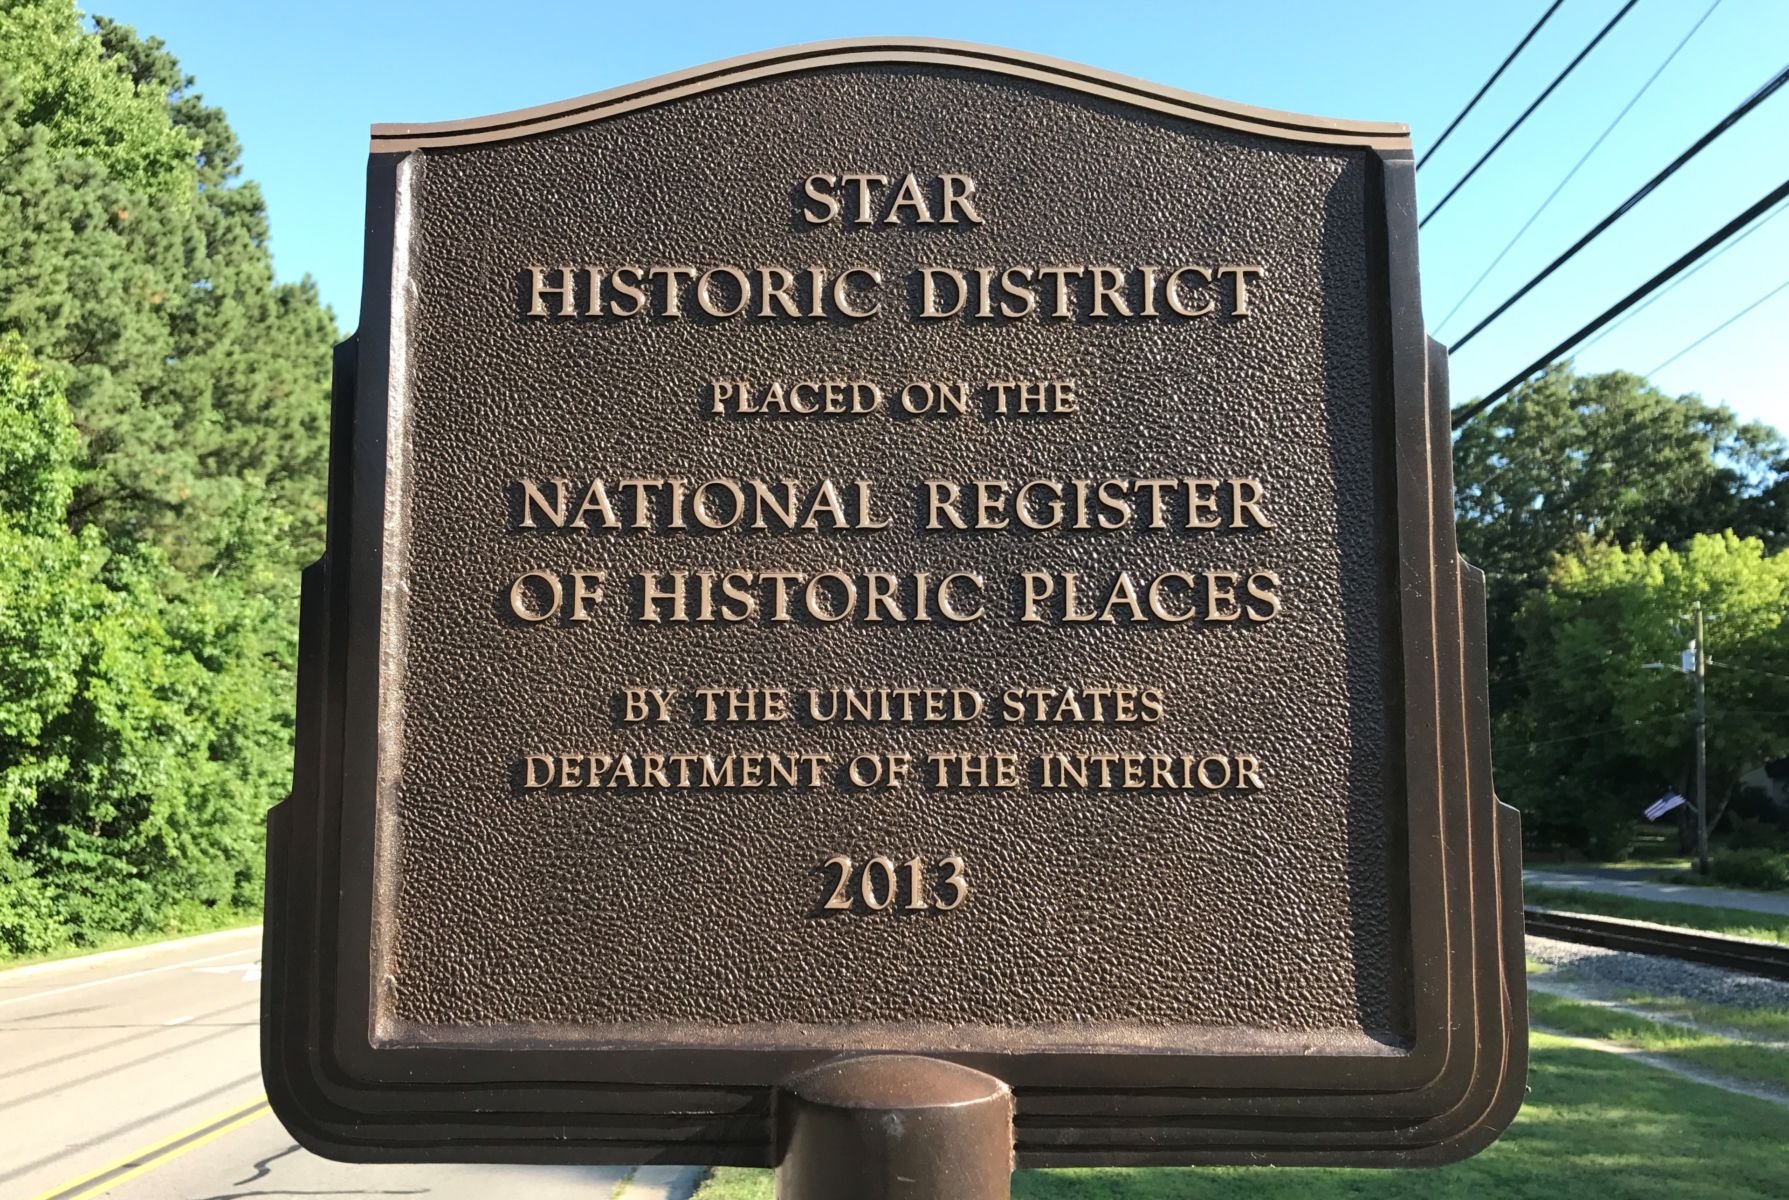 Historic Town of Star